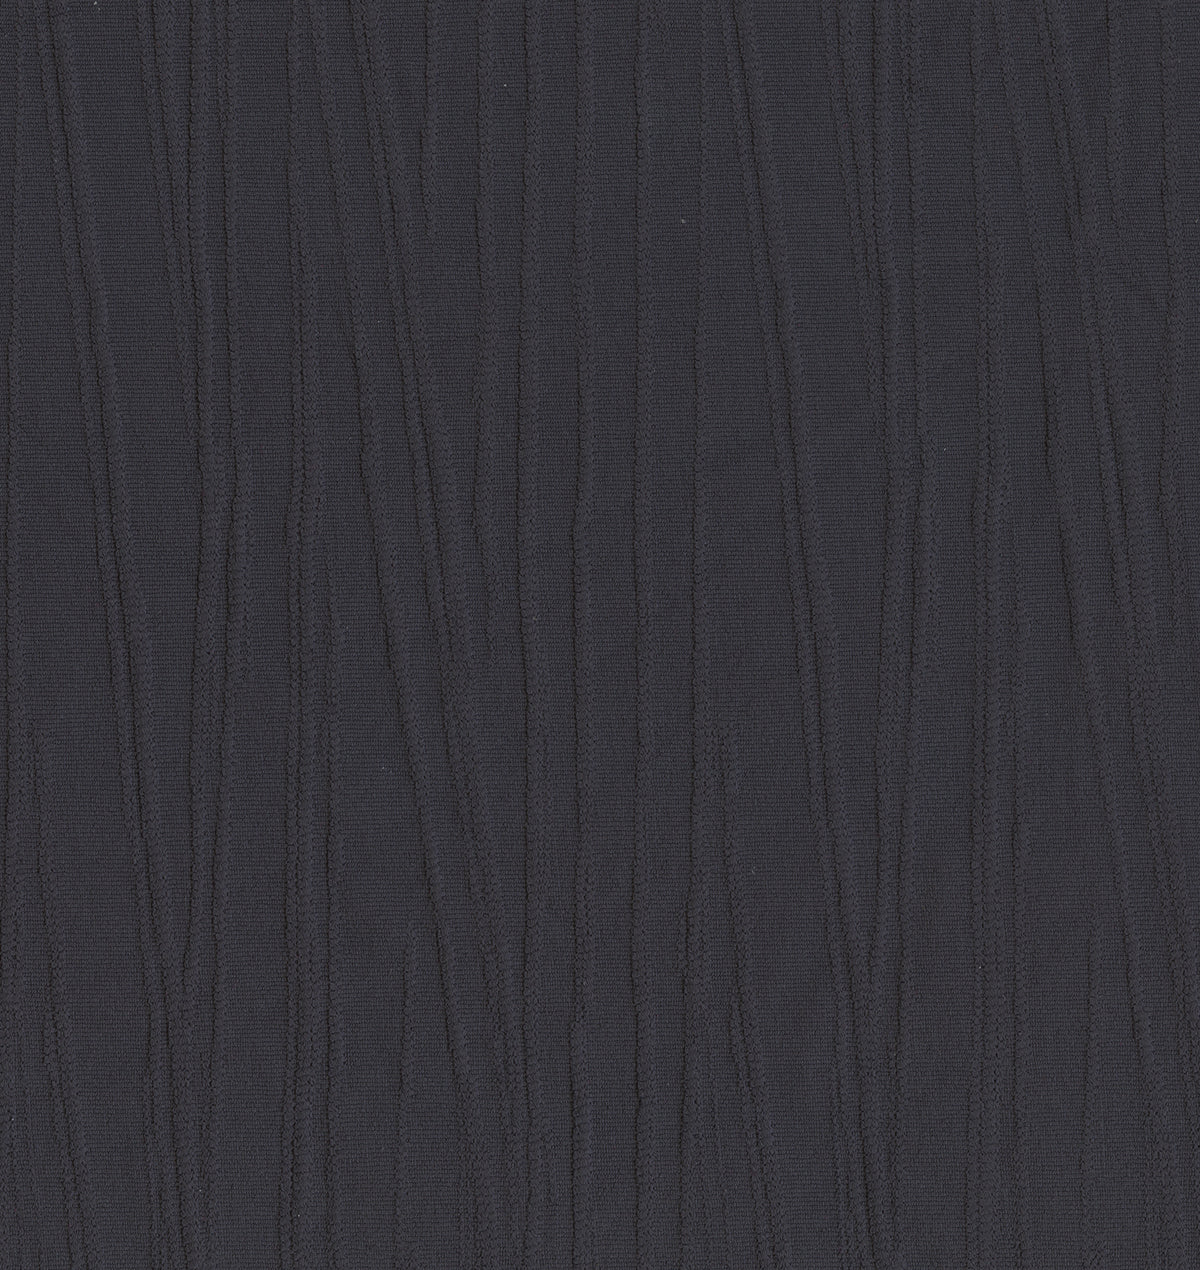 Sunsets Slate Seagrass Texture Danica Top